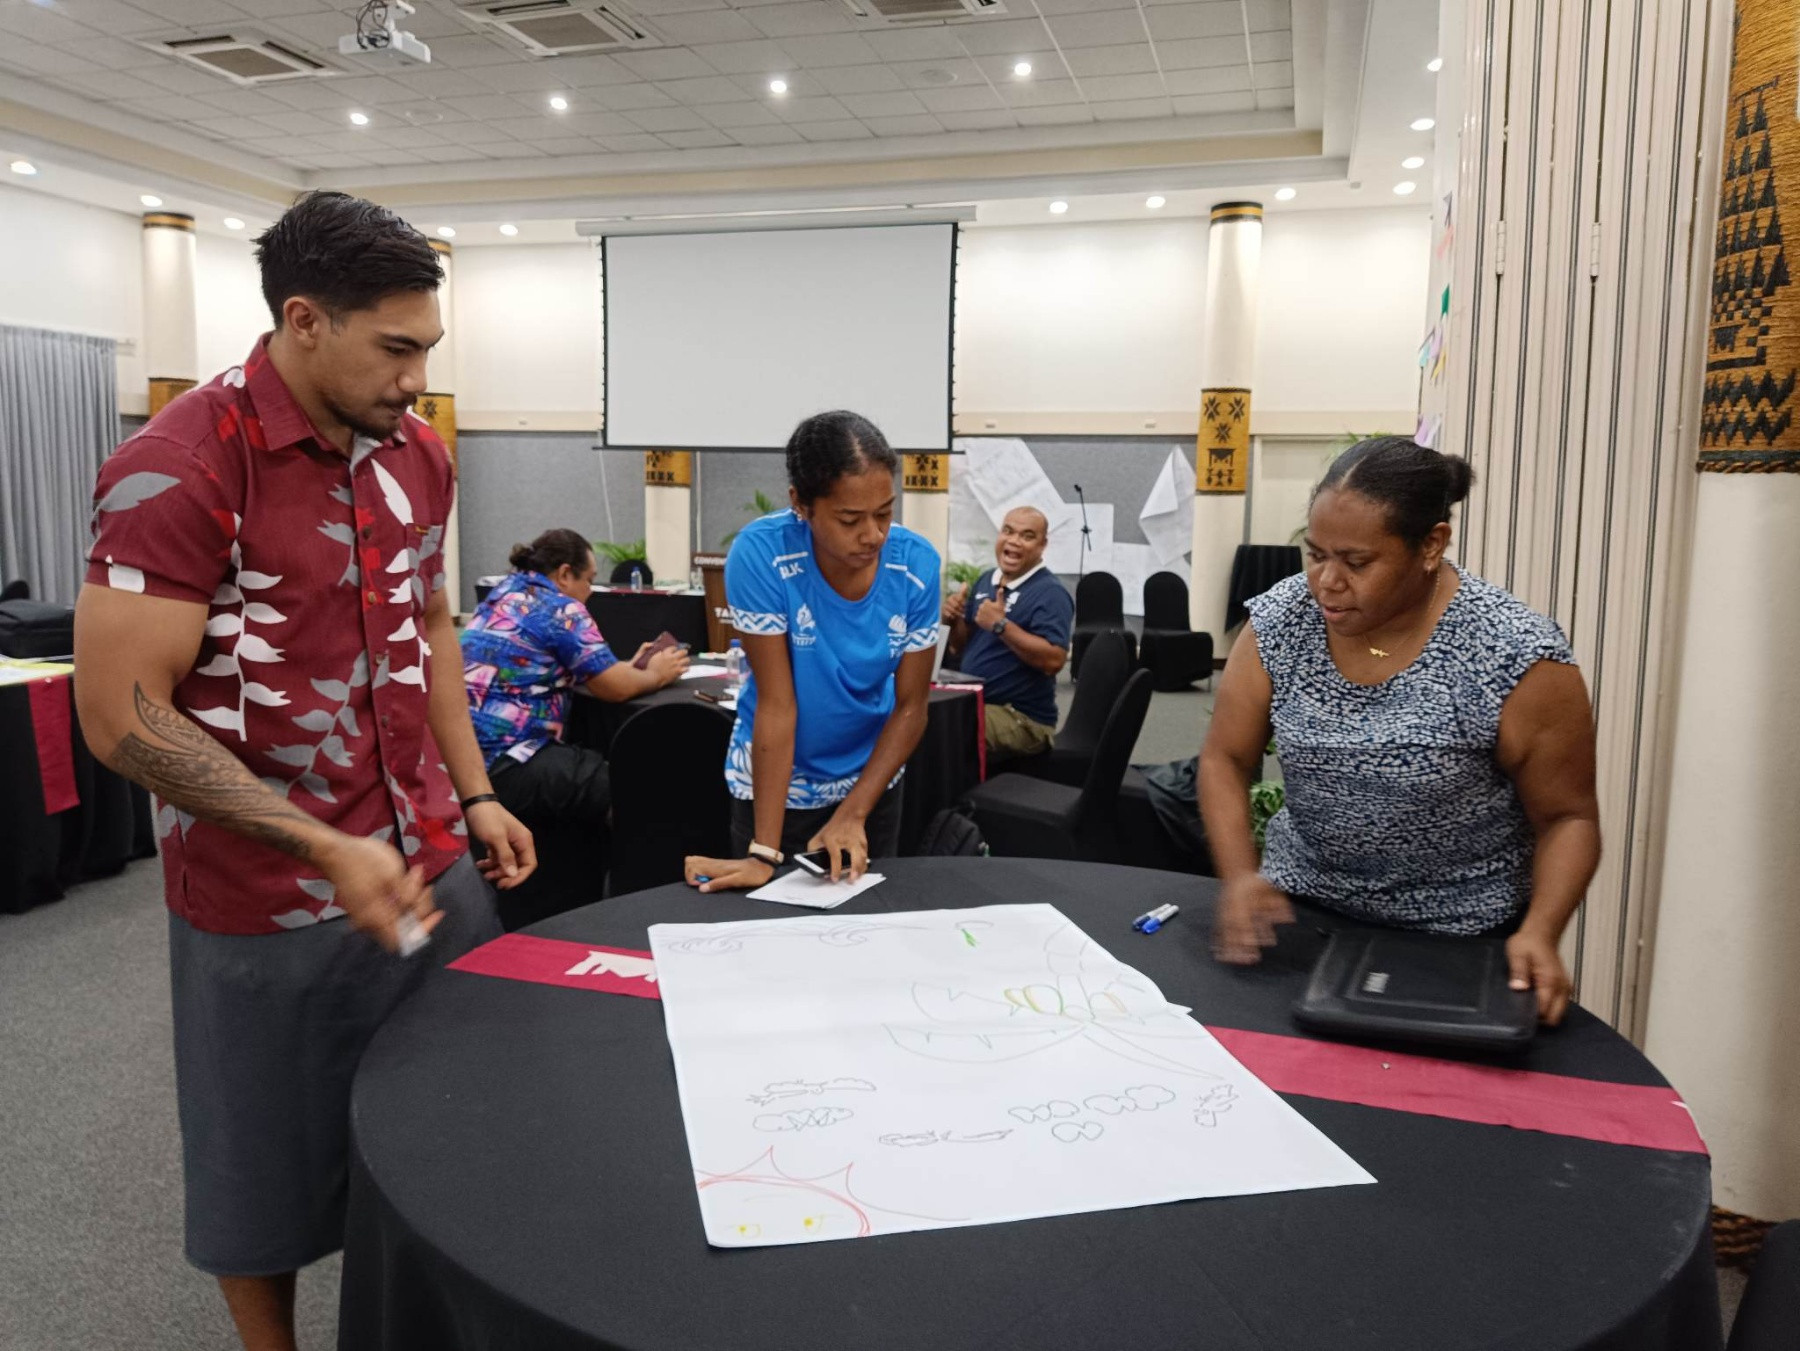 Student interns take part in first Commonwealth Games eqUIP workshop in Pacific